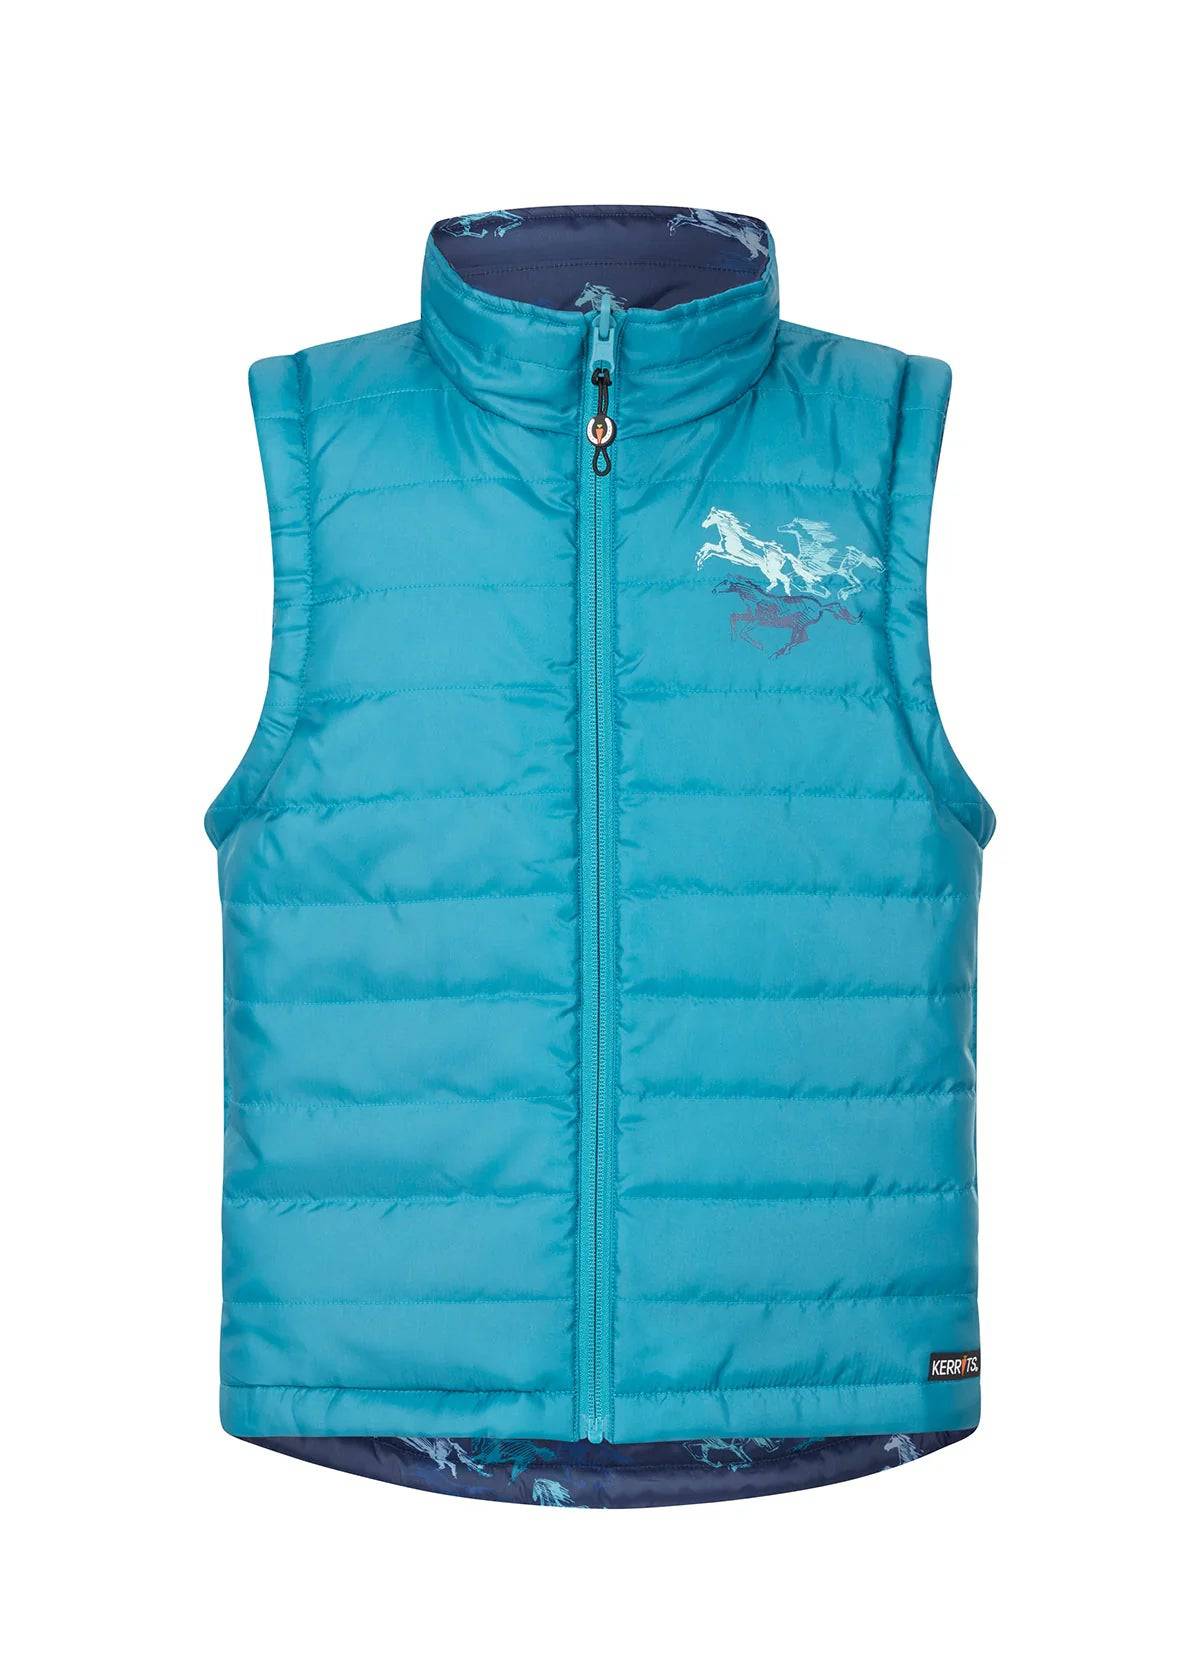 Kerrits Kids Pony Tracks Reversible Quilted Riding Vest - CLEARANCE